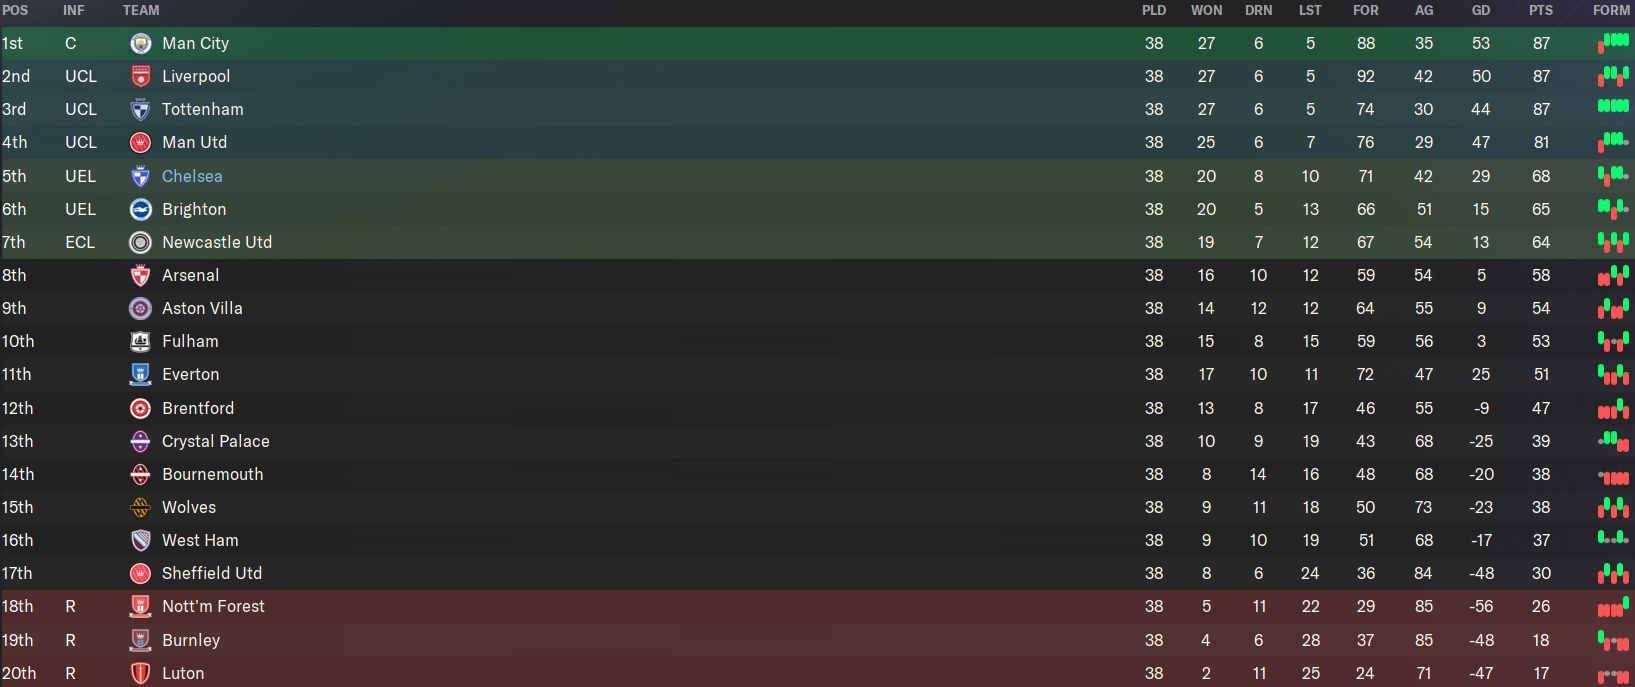 Chelsea FC first season results on FM24